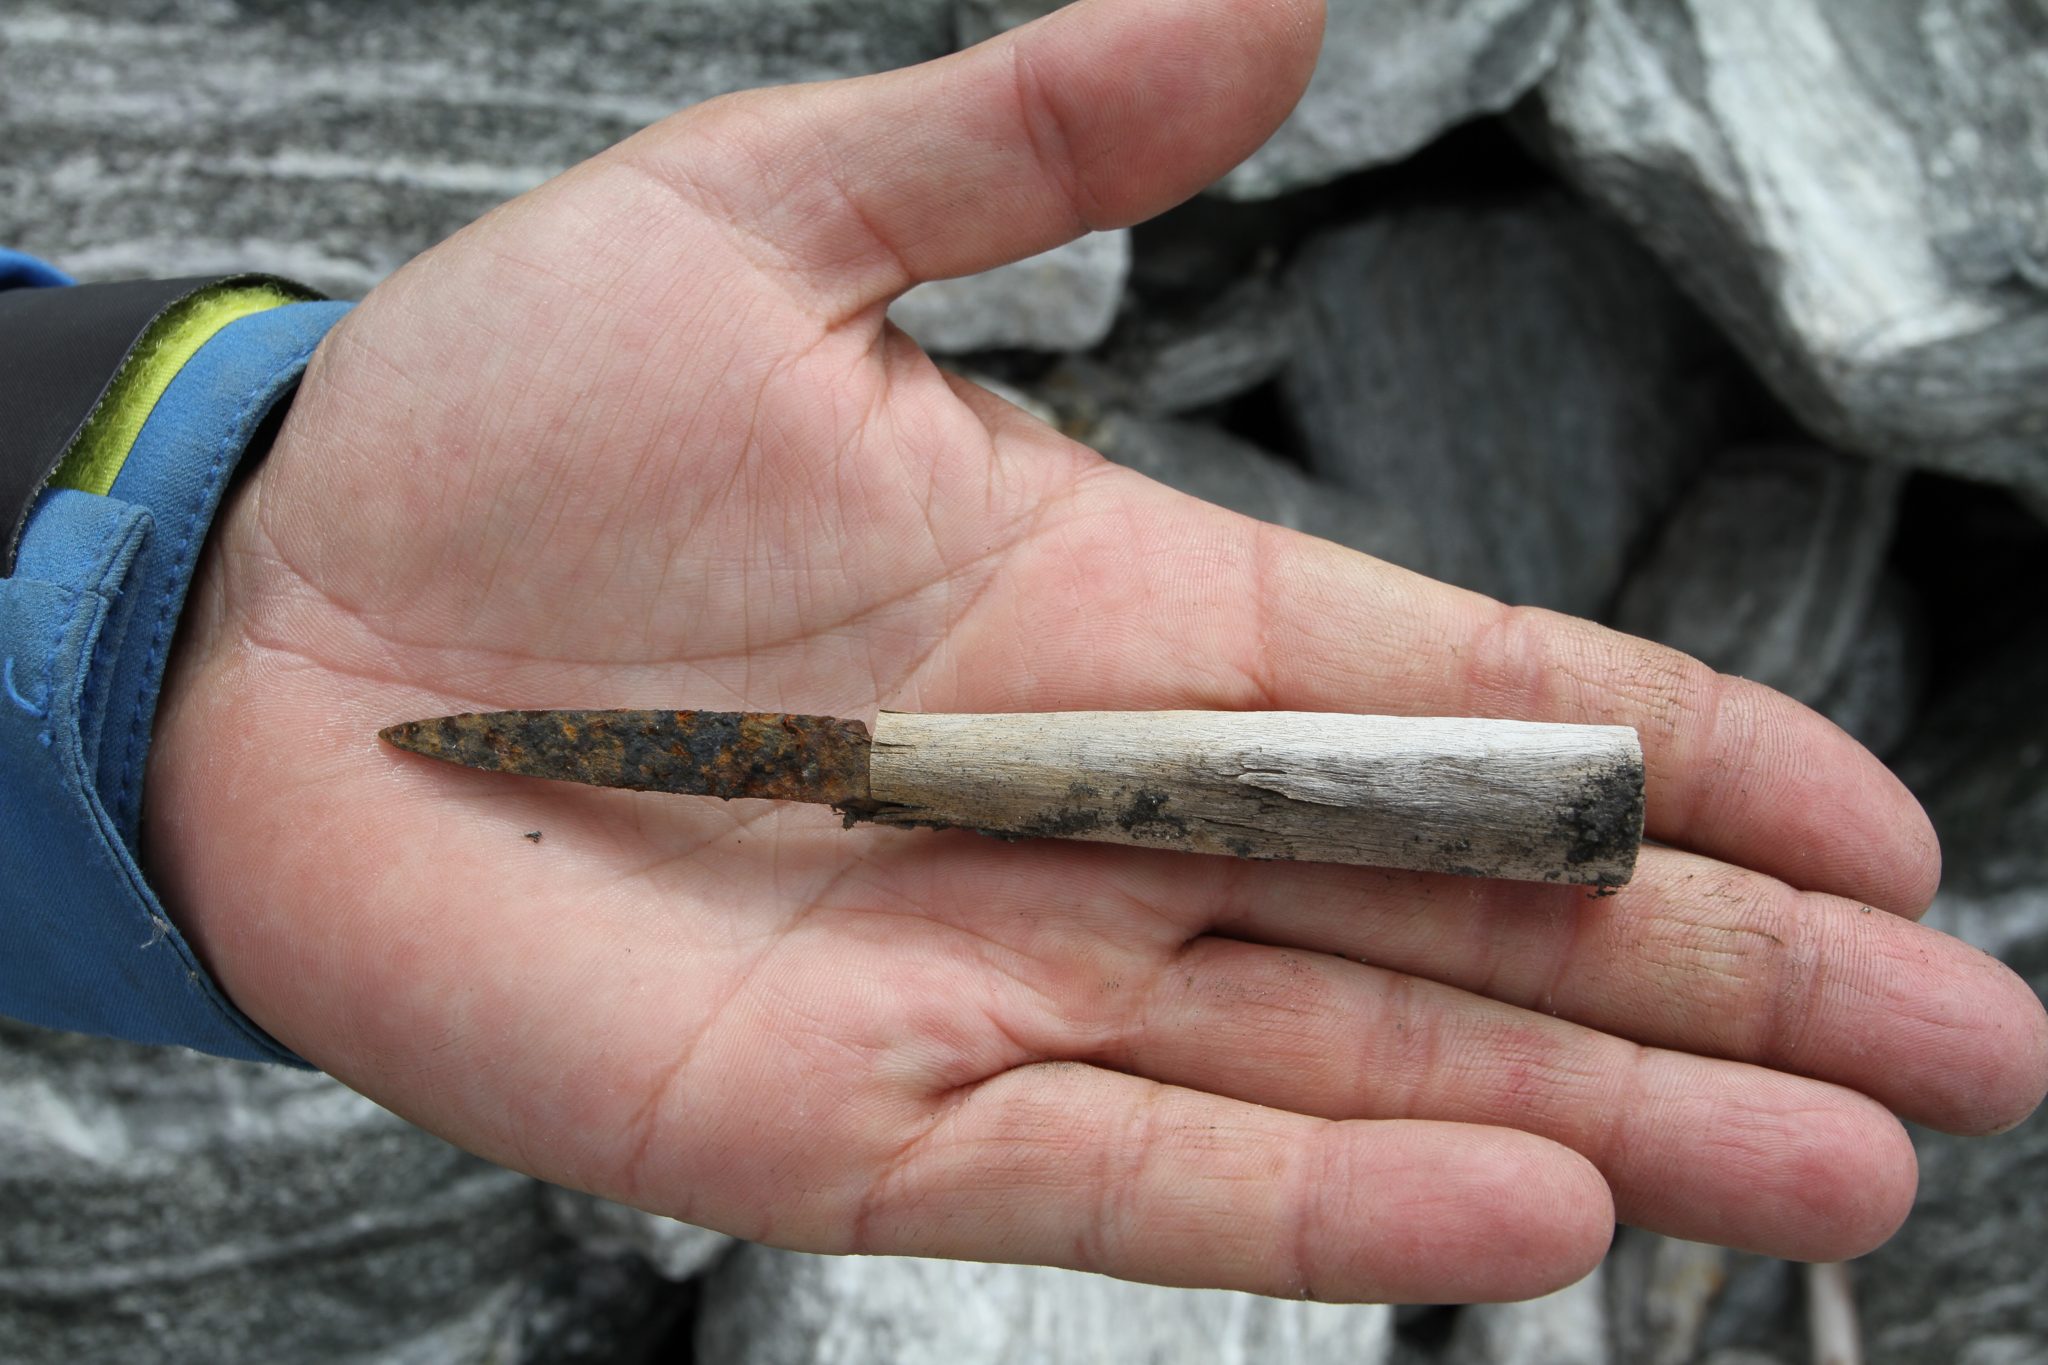 Knife: A small iron knife with a birchwood handle, found just below the pass area at Lendbreen. Radiocarbon-dated to the 11th Century AD. Photo: Espen Finstad, secretsoftheice.com.